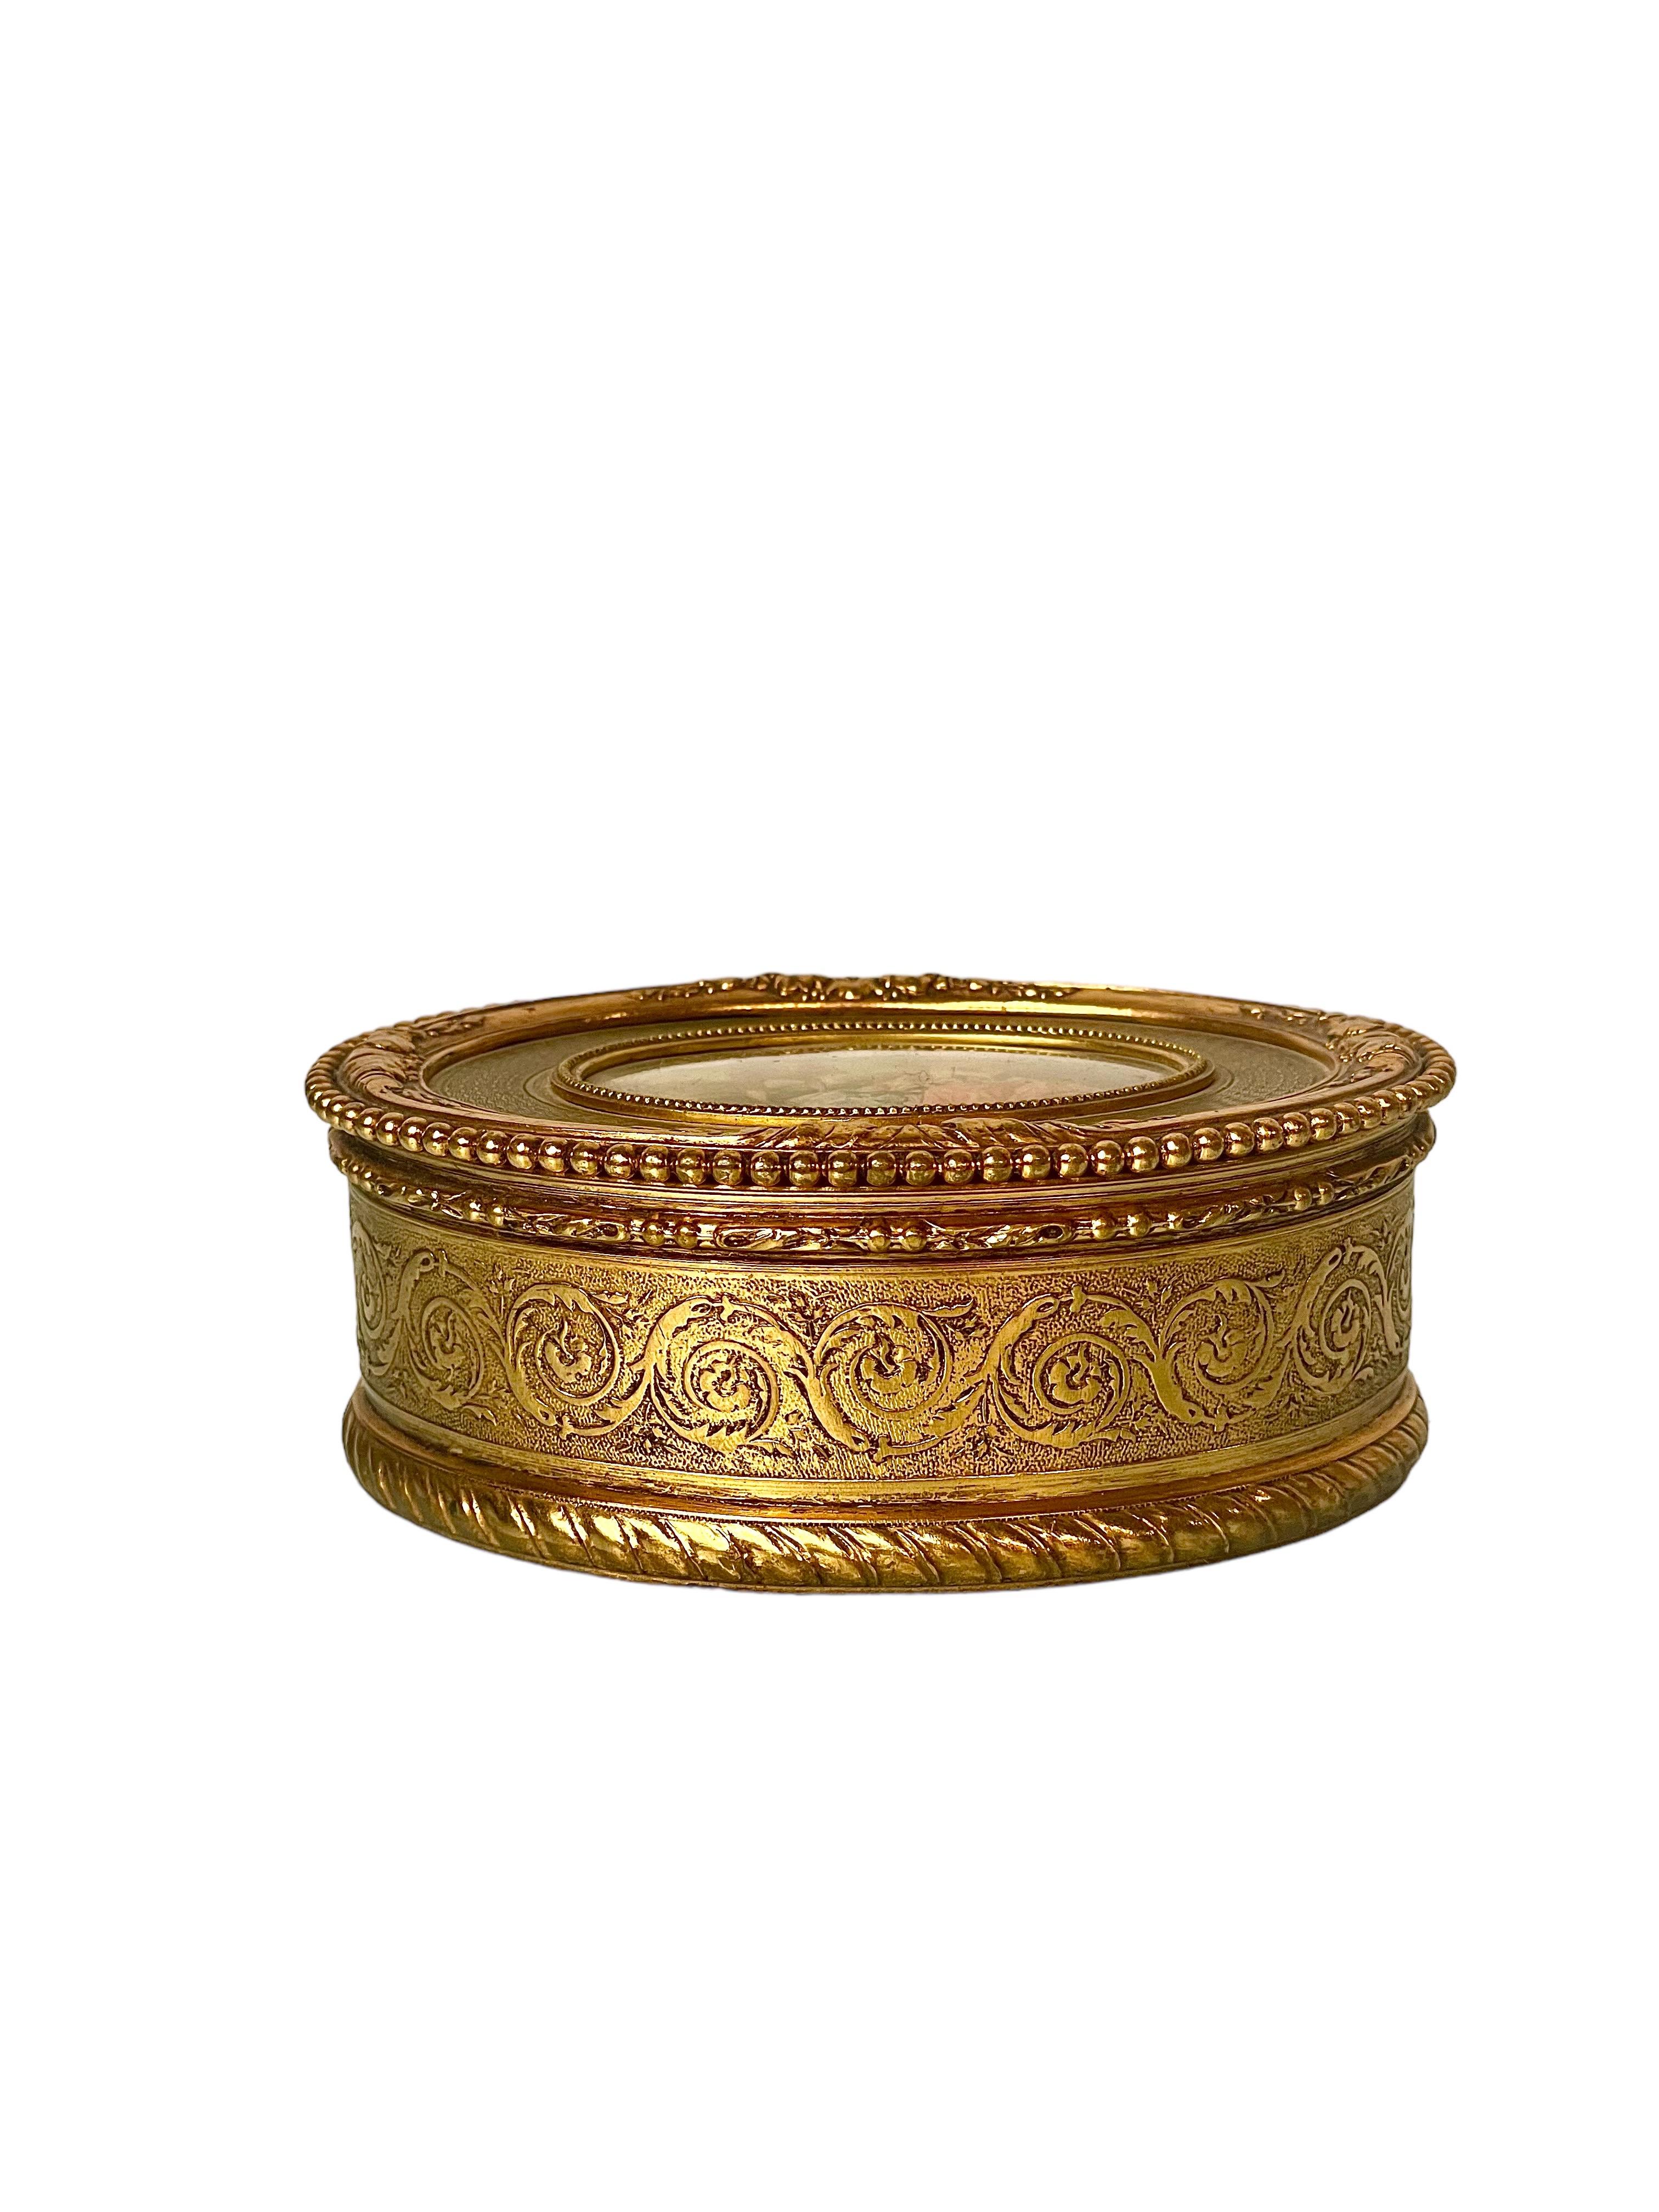 French Louis XVI-Style Gilt Bronze Jewellery Box For Sale